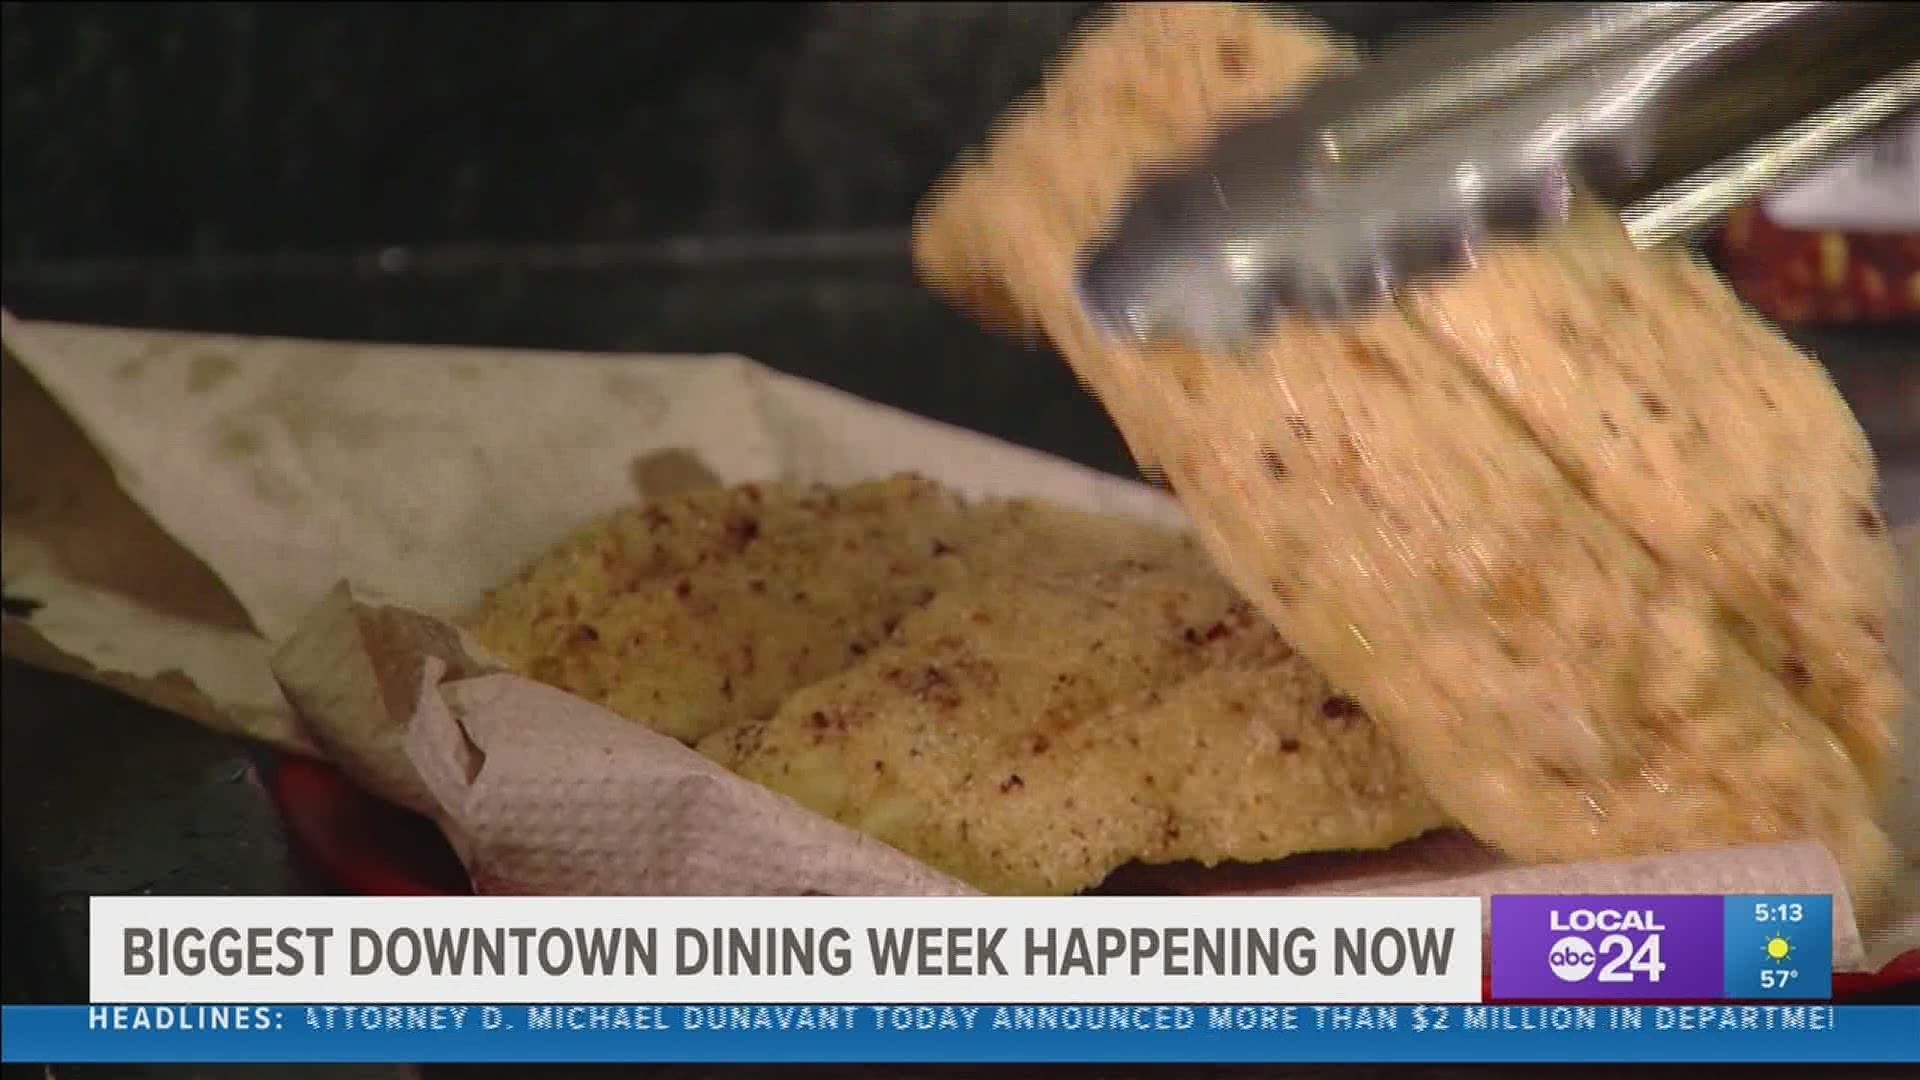 66 restaurants are participating in the 12th annual Downtown Dining Week which offers discounts on meals to bring customers back downtown.